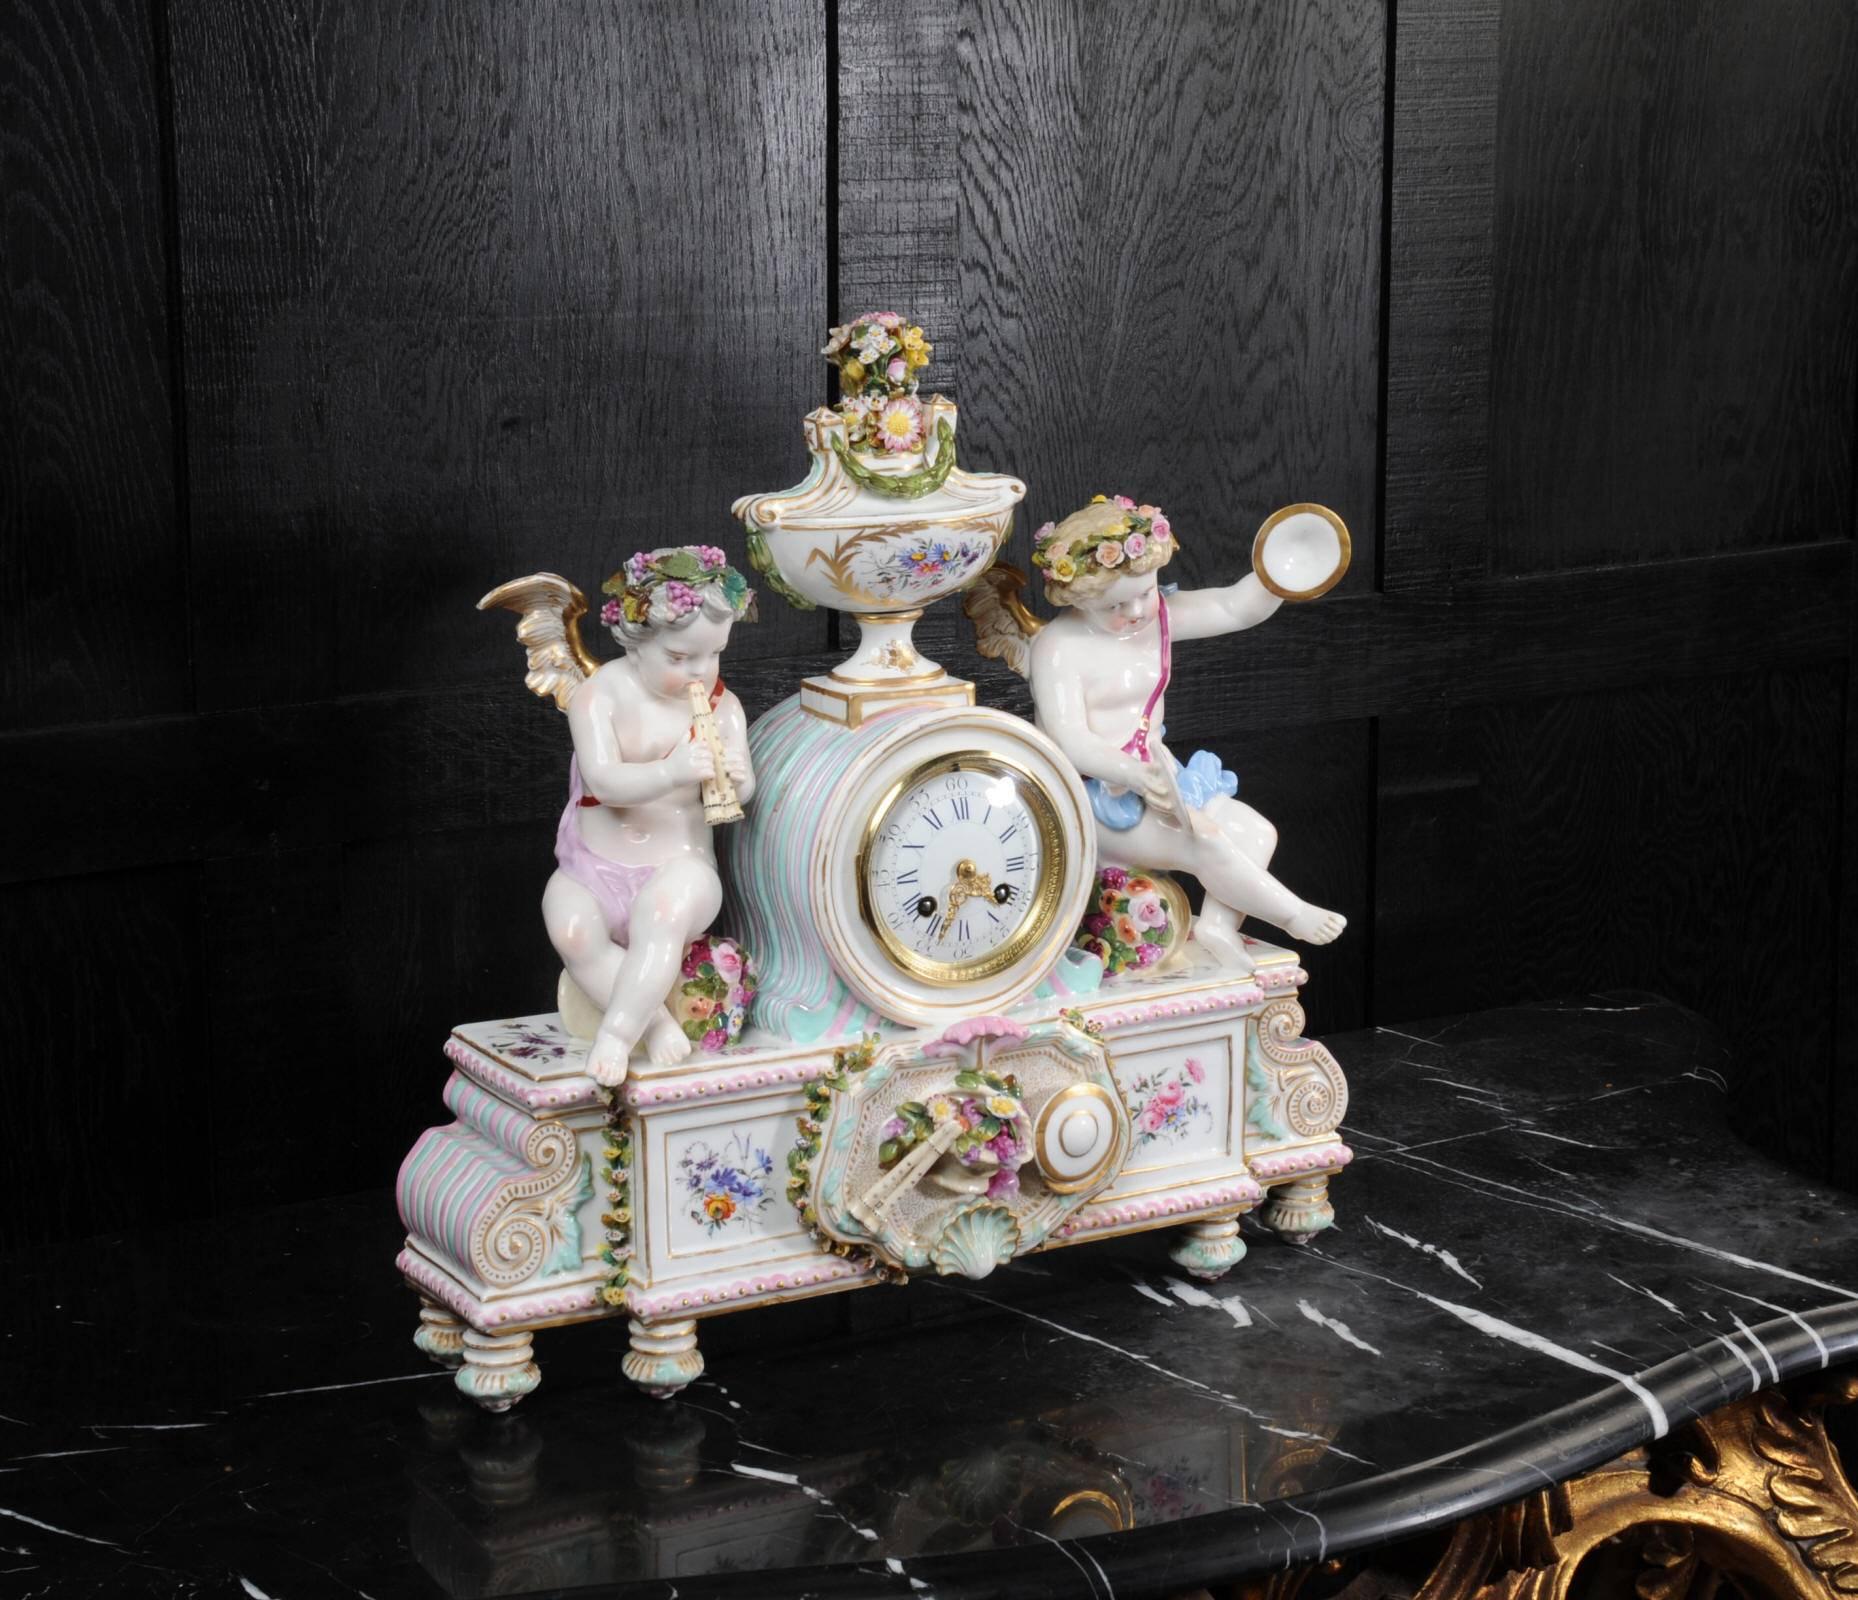 A large and beautiful antique French clock of exquisite Meissen style porcelain in the Louis XV style. Porcelain is profusely applied with delicate flowers. It features two putti with musical instruments, one with double flute and the other playing